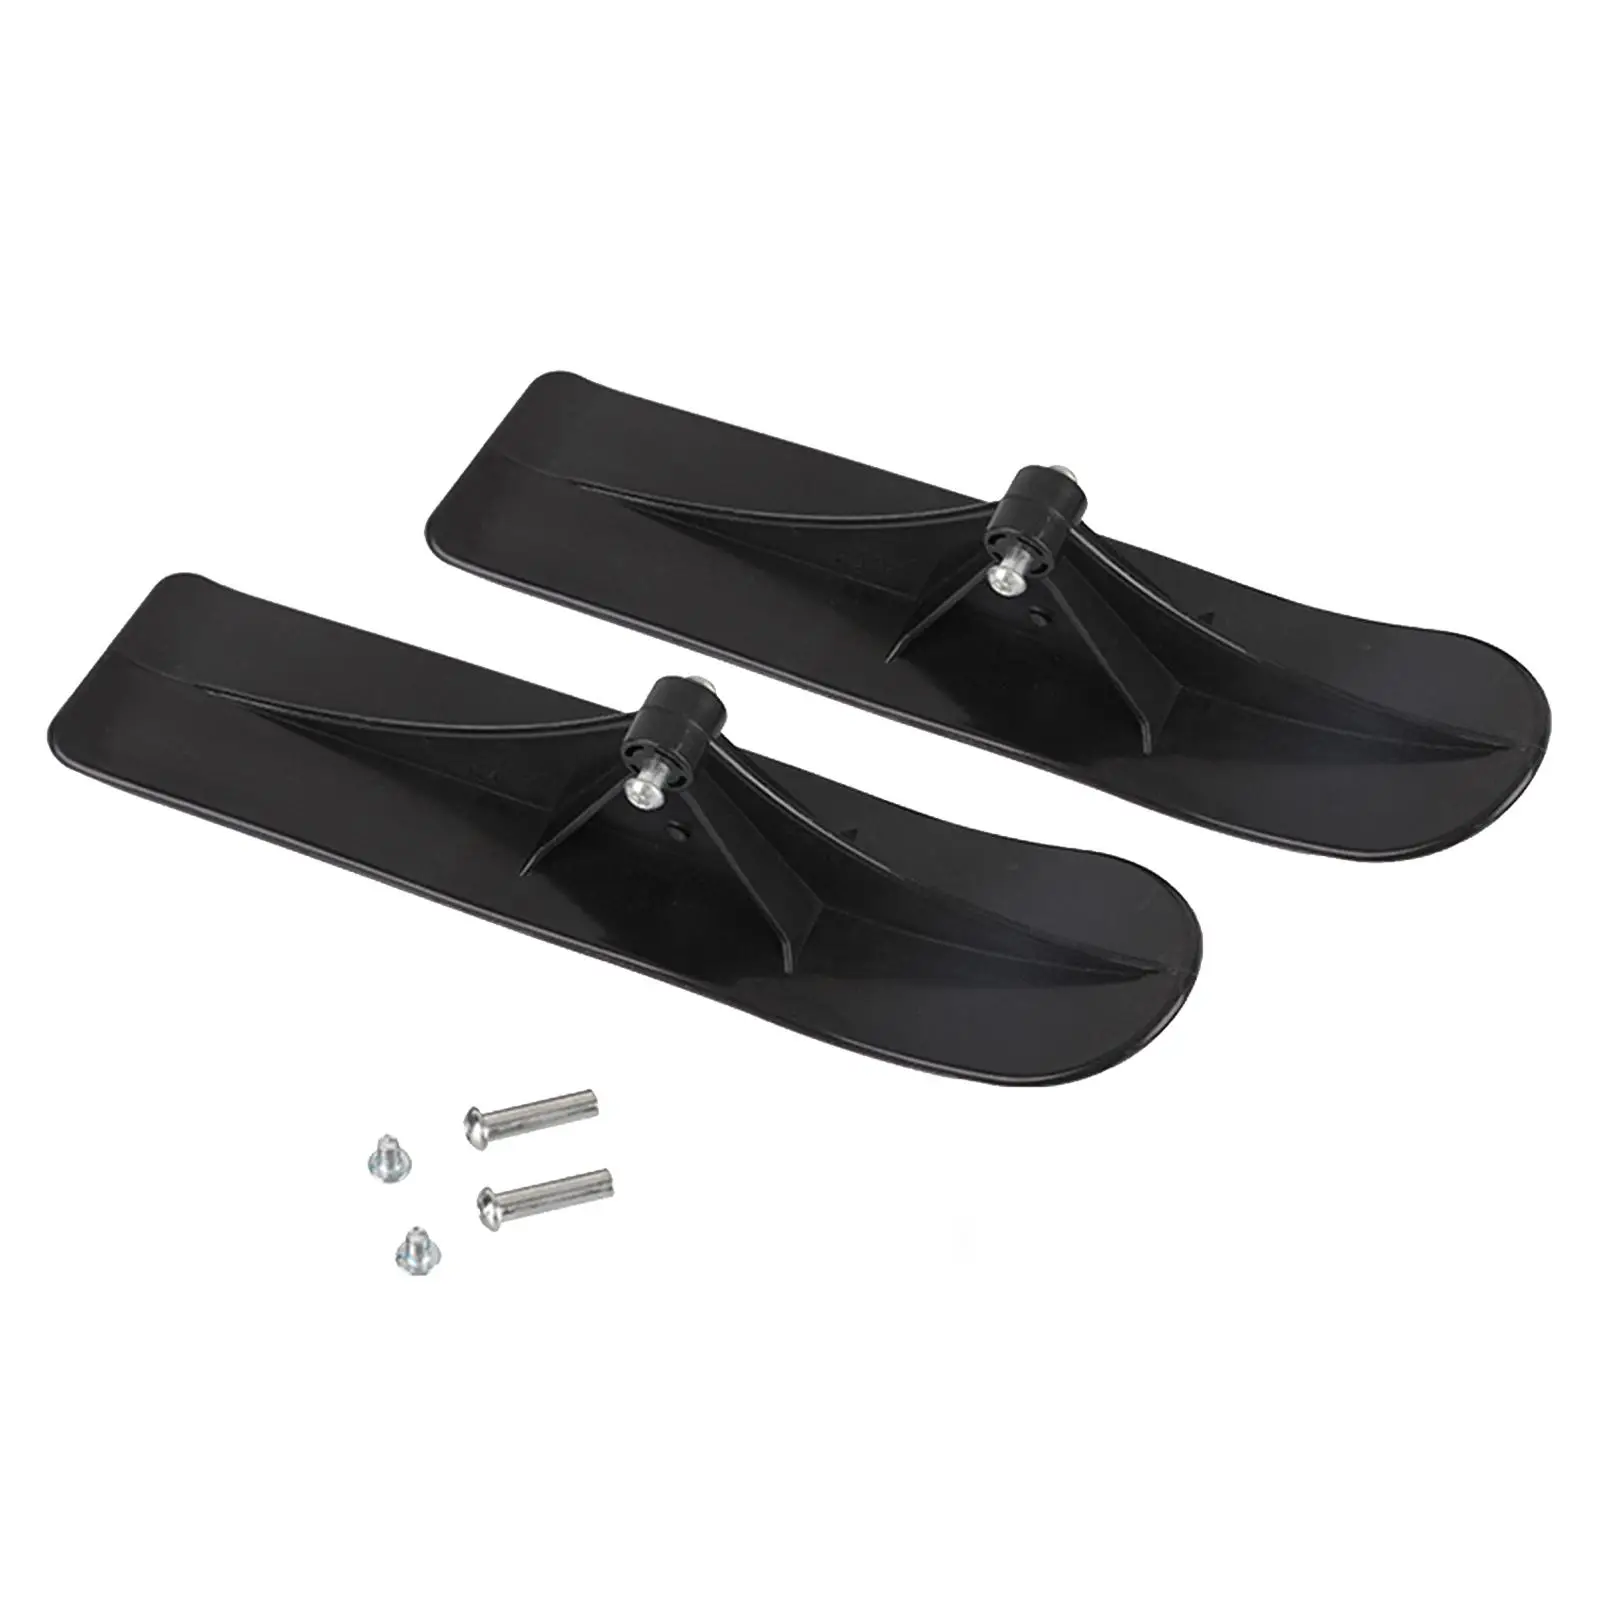 Snow Scooter Ski Sled Toboggan Refit Boots Multifunction with Screw Replacement Ski Board for Downhill Sleds Children Novices